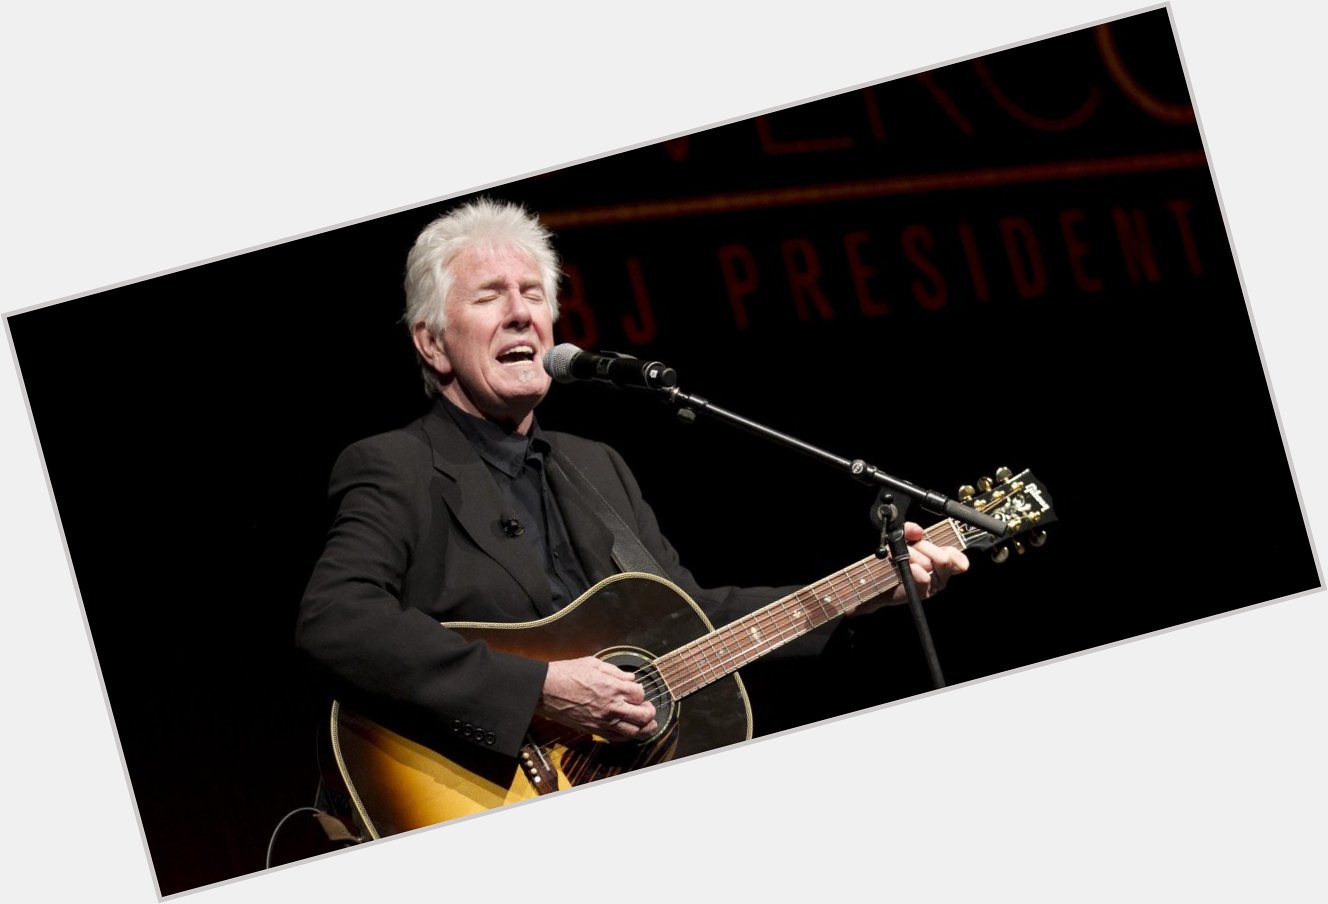  Our House  Happy Birthday Today 2/2 to legendary singer/songwriter/ guitarist Graham Nash. Rock ON! 